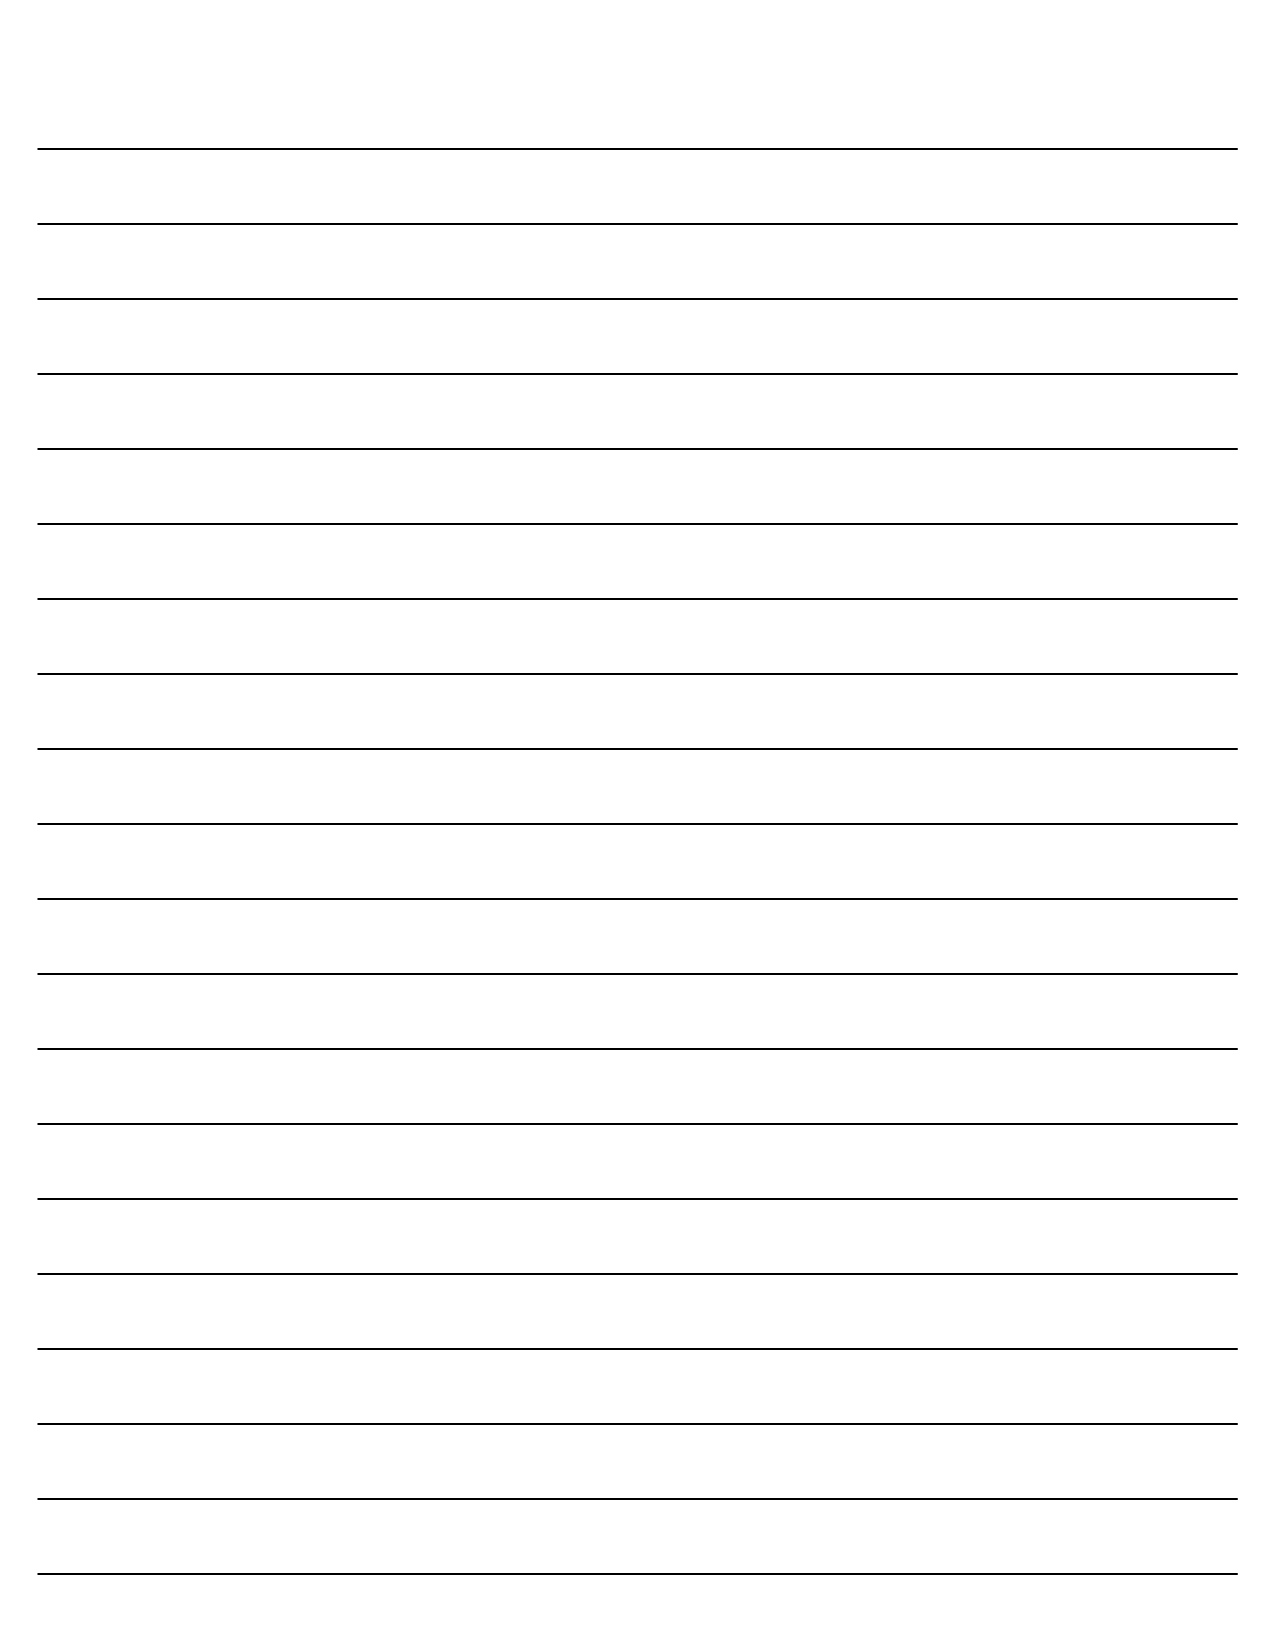 print-lined-paper-free-lined-paper-printable